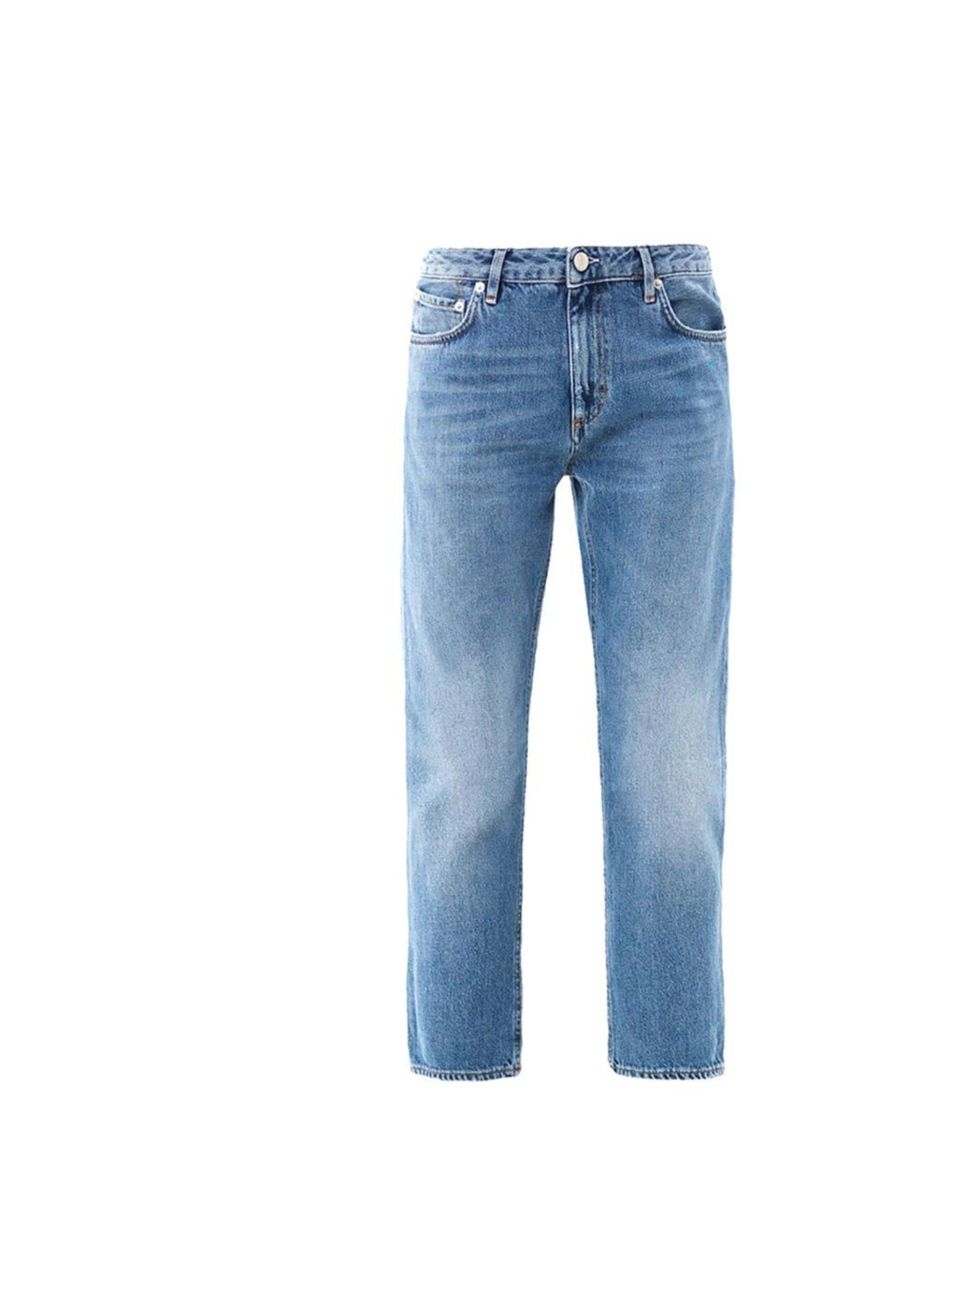 <p>These cropped boyfriend jeans from ACNE are the stuff of denim dreams, £190, <a href="http://www.matchesfashion.com/product/157556">Matches Fashion</a></p>